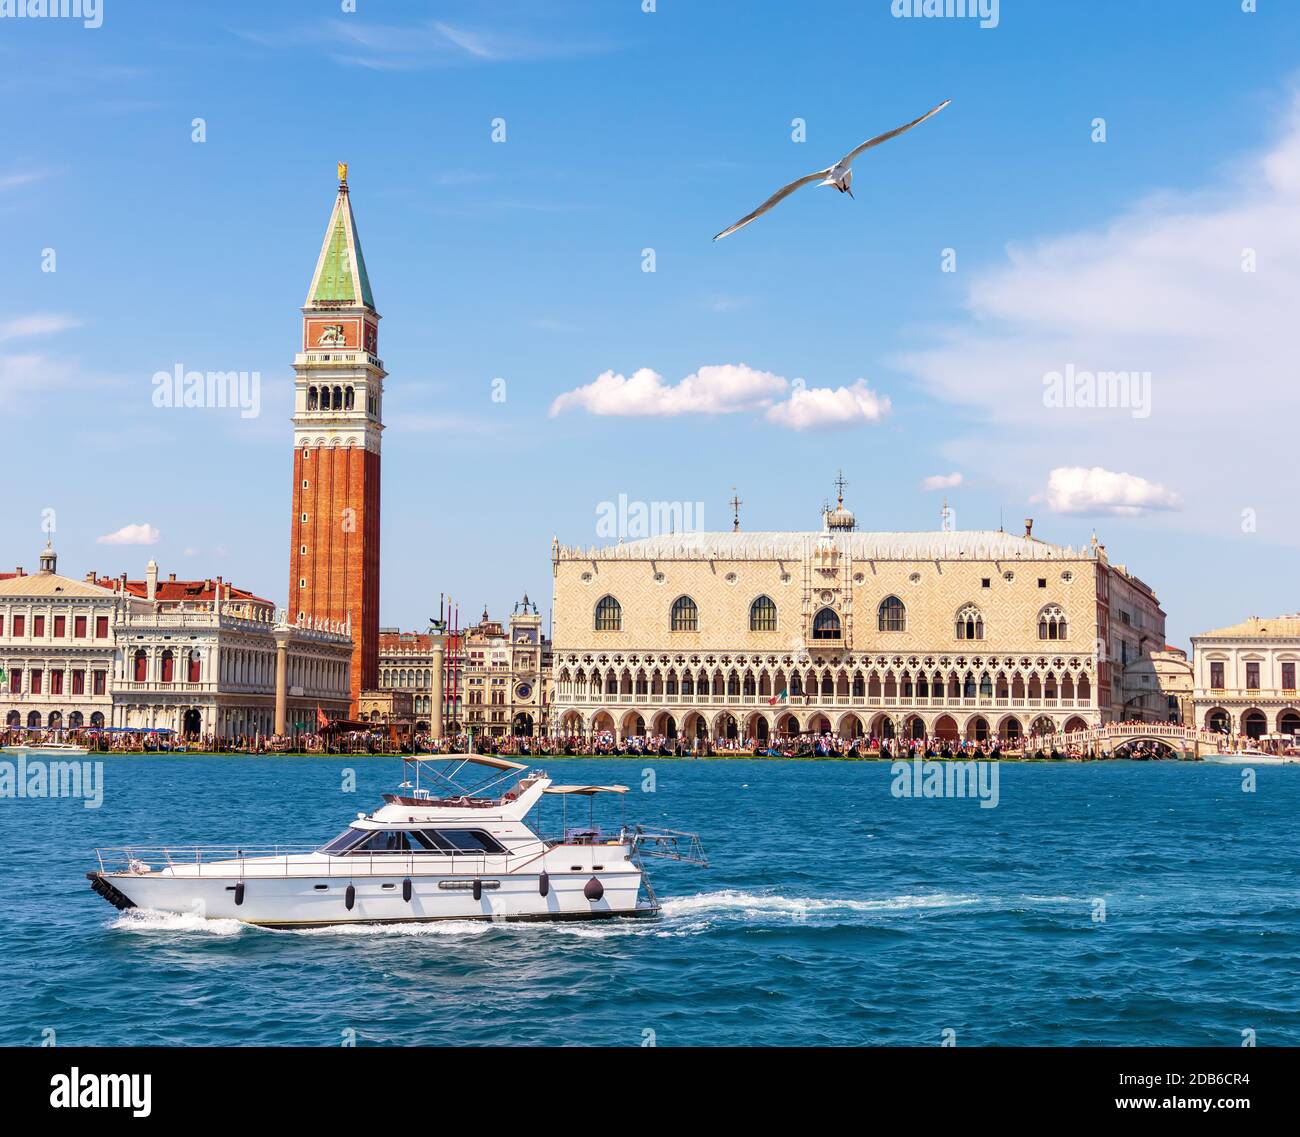 Doge's palace and the Camapanile, Grand canal of Venice, Italy. Stock Photo